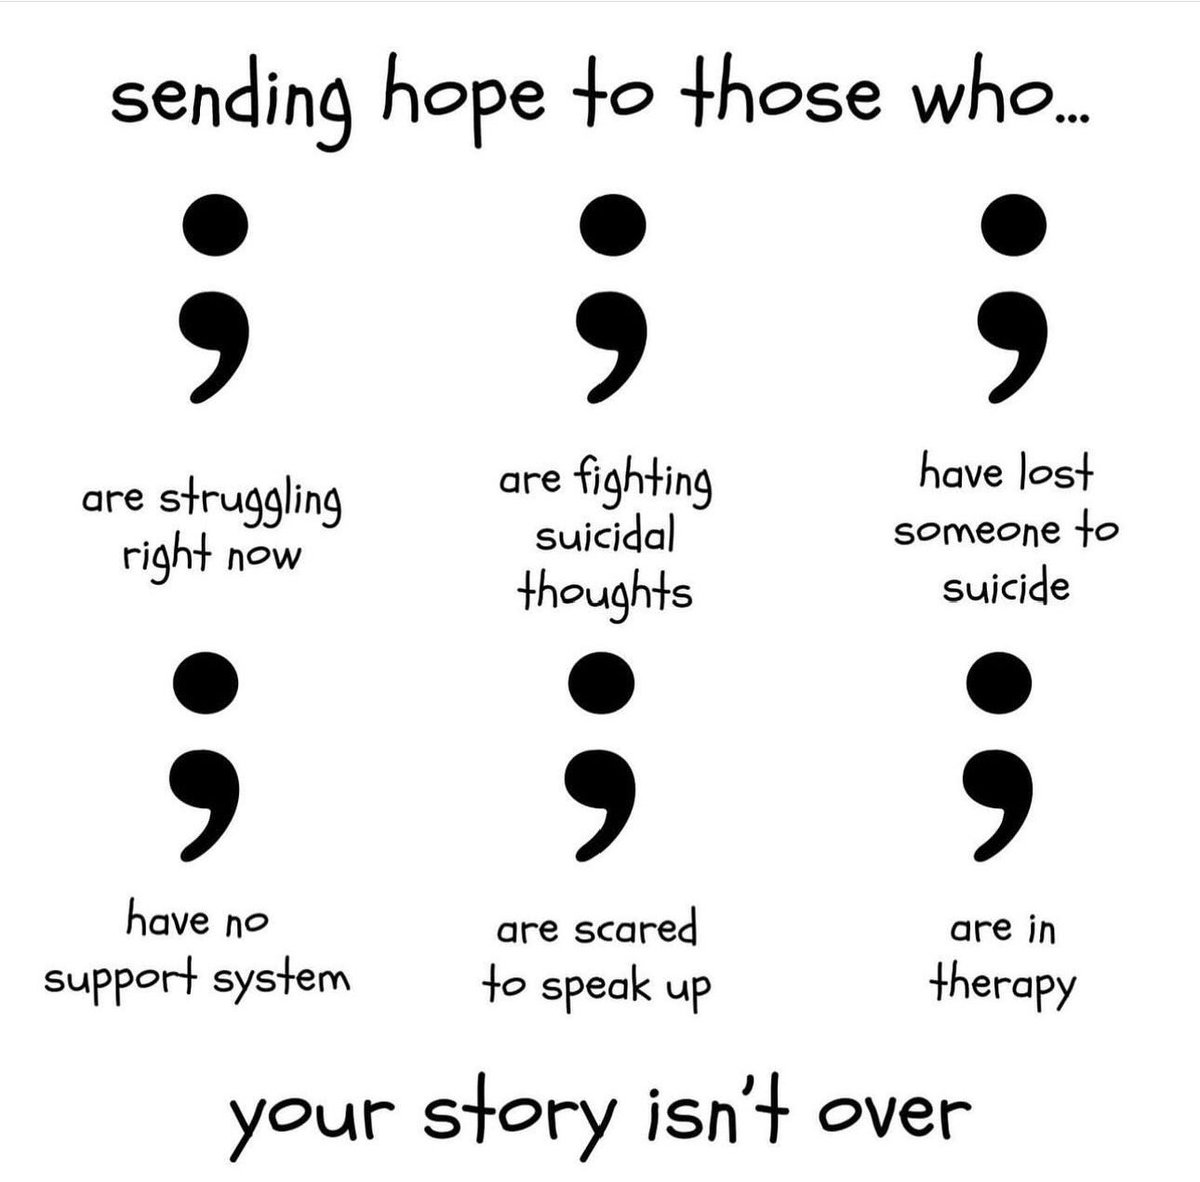 ❤️🙌🏼❤️💫✨You are Loved, You are Worthy, You are seen, You deserve Happiness. Your story isn’t over. Please call 988 if you feel you’re in crisis✨🙏🏼✨ #SuicidePrevention #YourStoryIsntOver